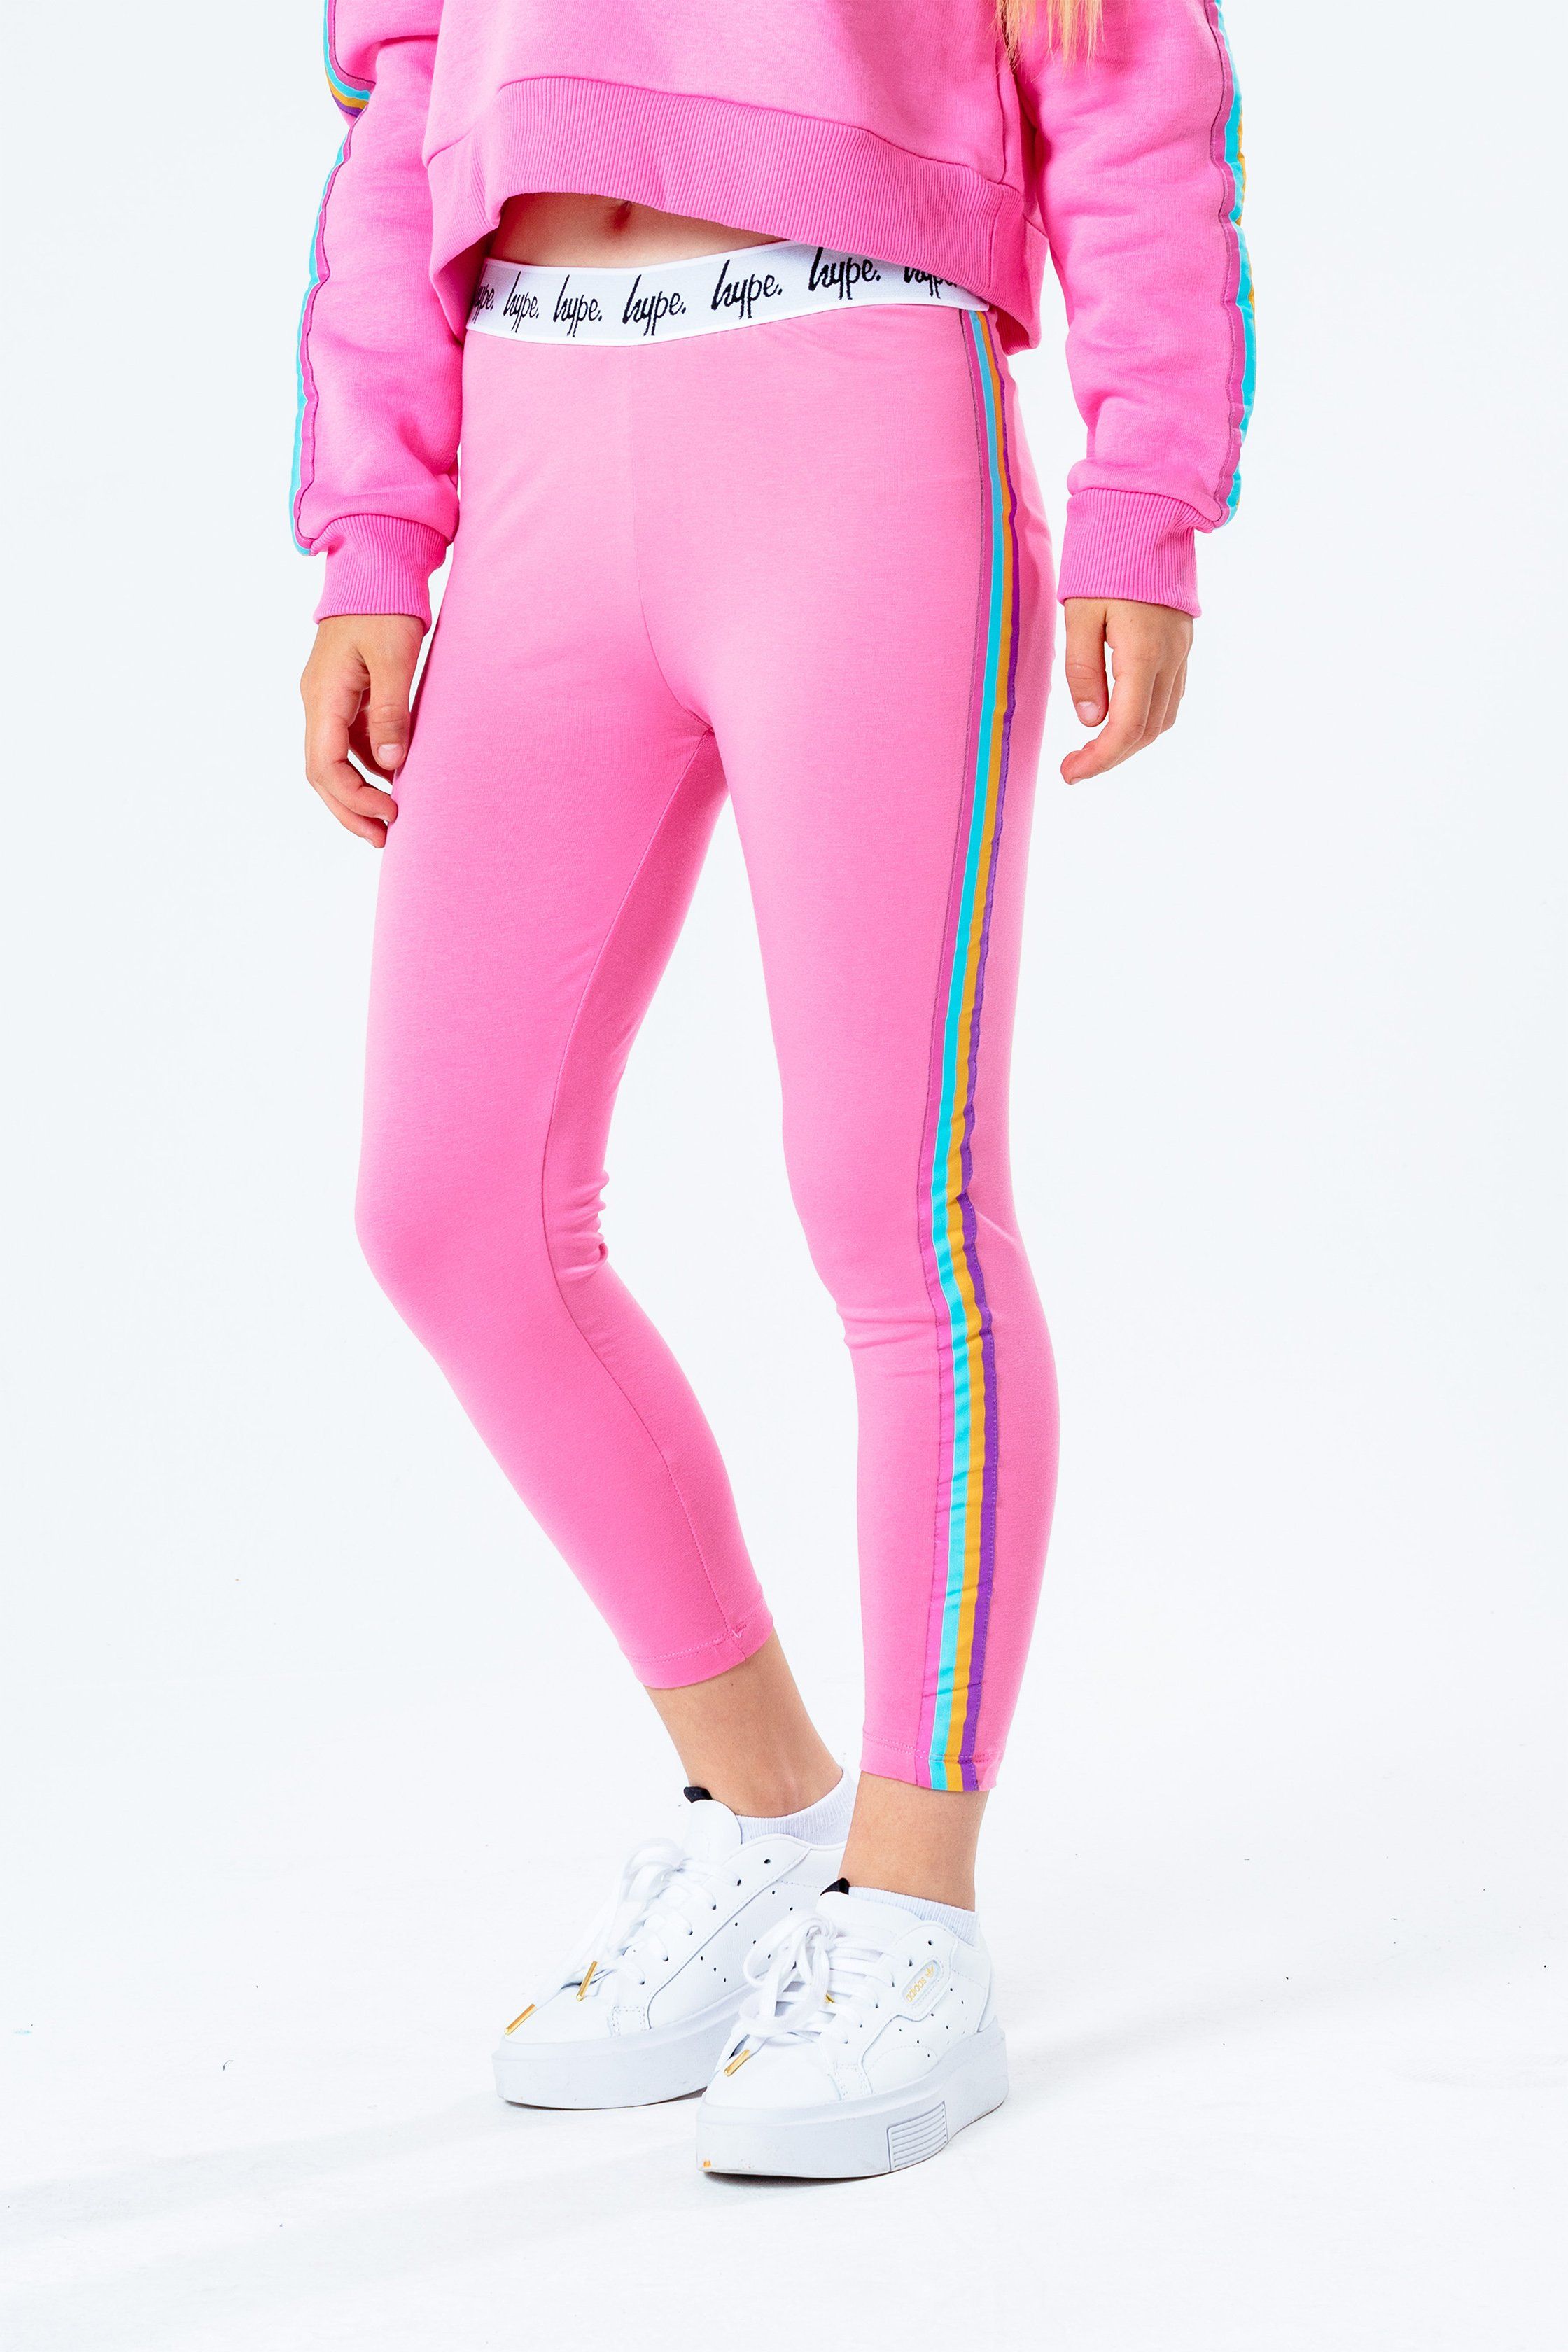 Meet the HYPE. girls pink rainbow leggings, perfect for those who love to make a statement. Designed with a pink base, with rainbow striped side taping, finished with a monochrome embossed elasticated waistband. Mix 'n' match these leggings with any girls t-shirt or hoodie from the rainbow collection. Available in sizes 3-4 years to 16 years. Machine wash at 30 degrees.